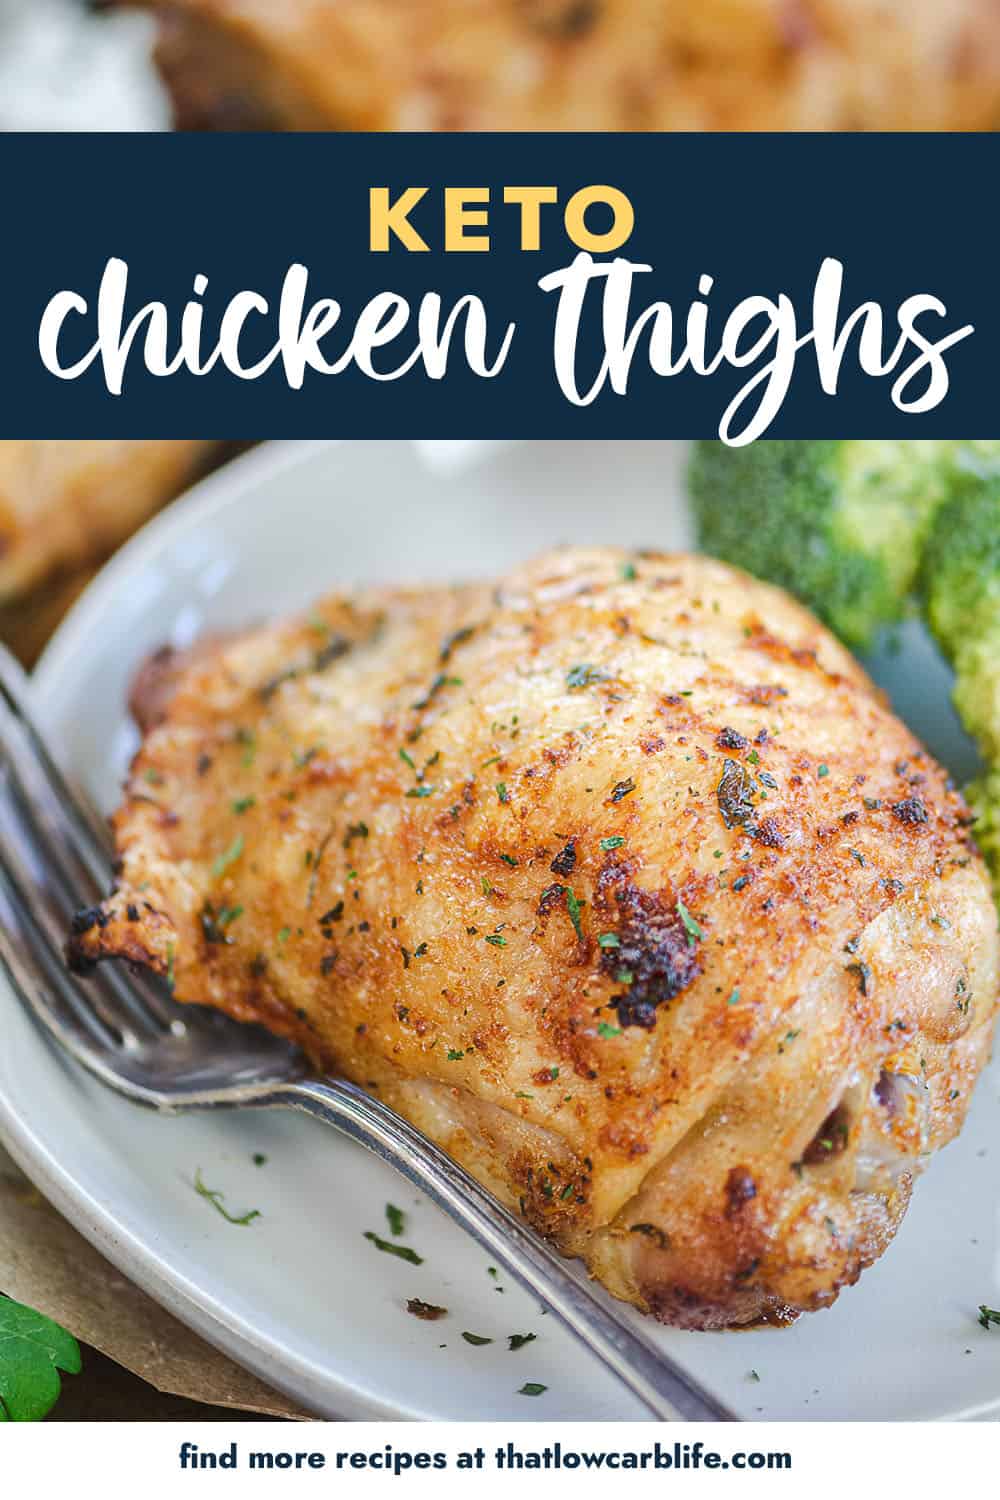 keto chicken thigh on small plate with text for Pinterest.